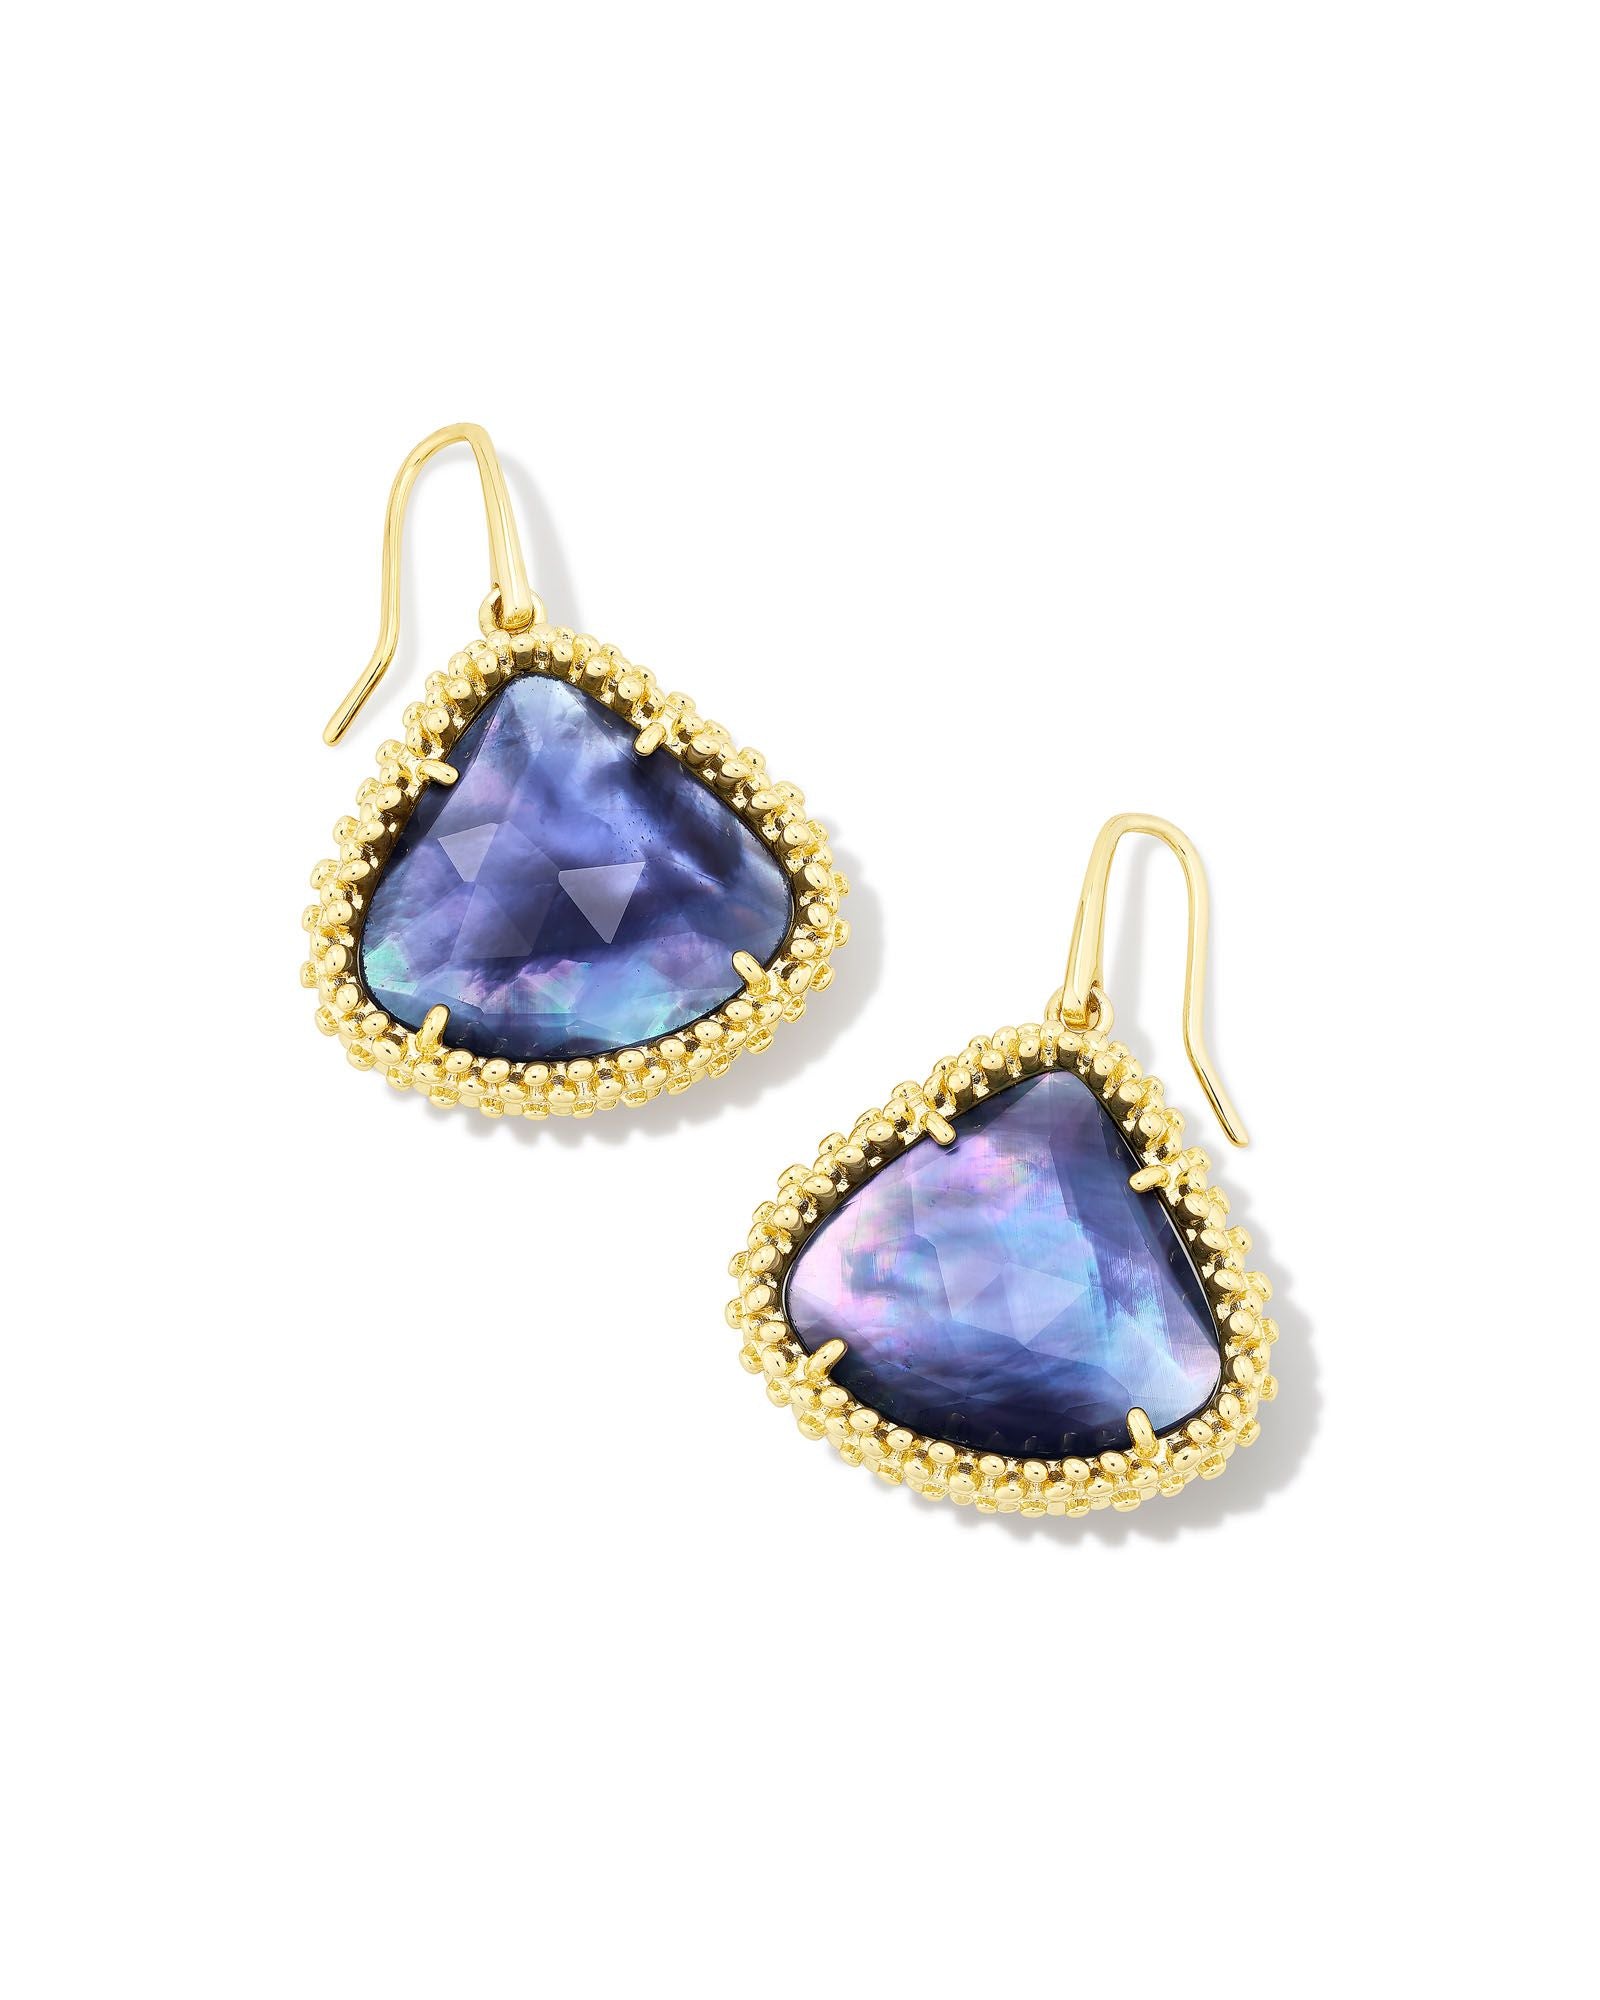 Framed Kendall Large Drop Earring in Gold Dark Lavender Illusion